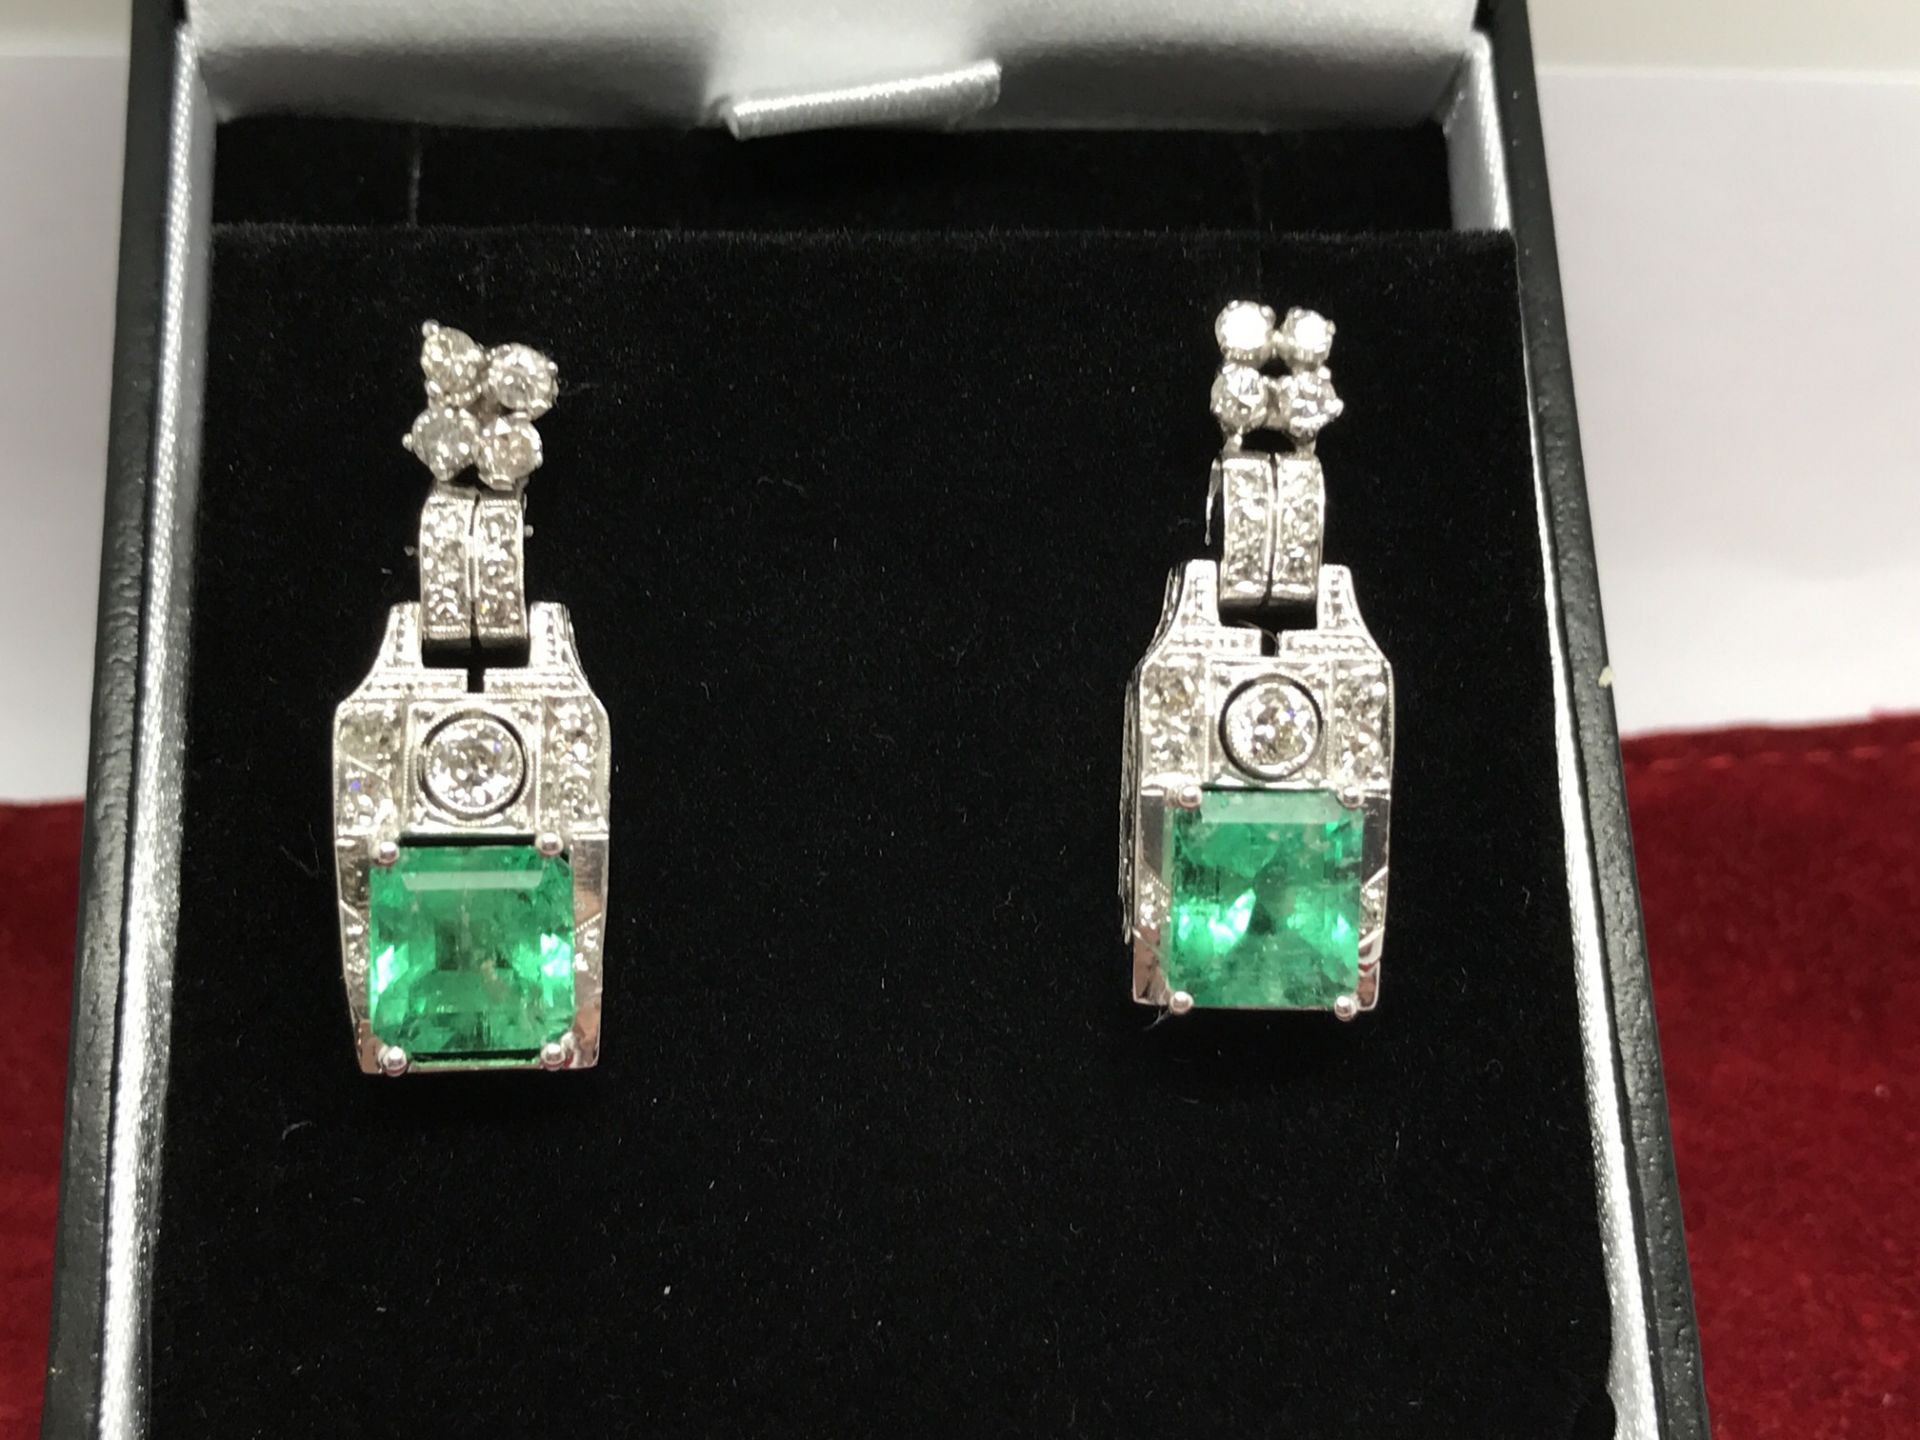 5.50cts COLOMBIAN EMERALD & DIAMOND EARRINGS SET IN WHITE METAL TESTED AS PLATINUM